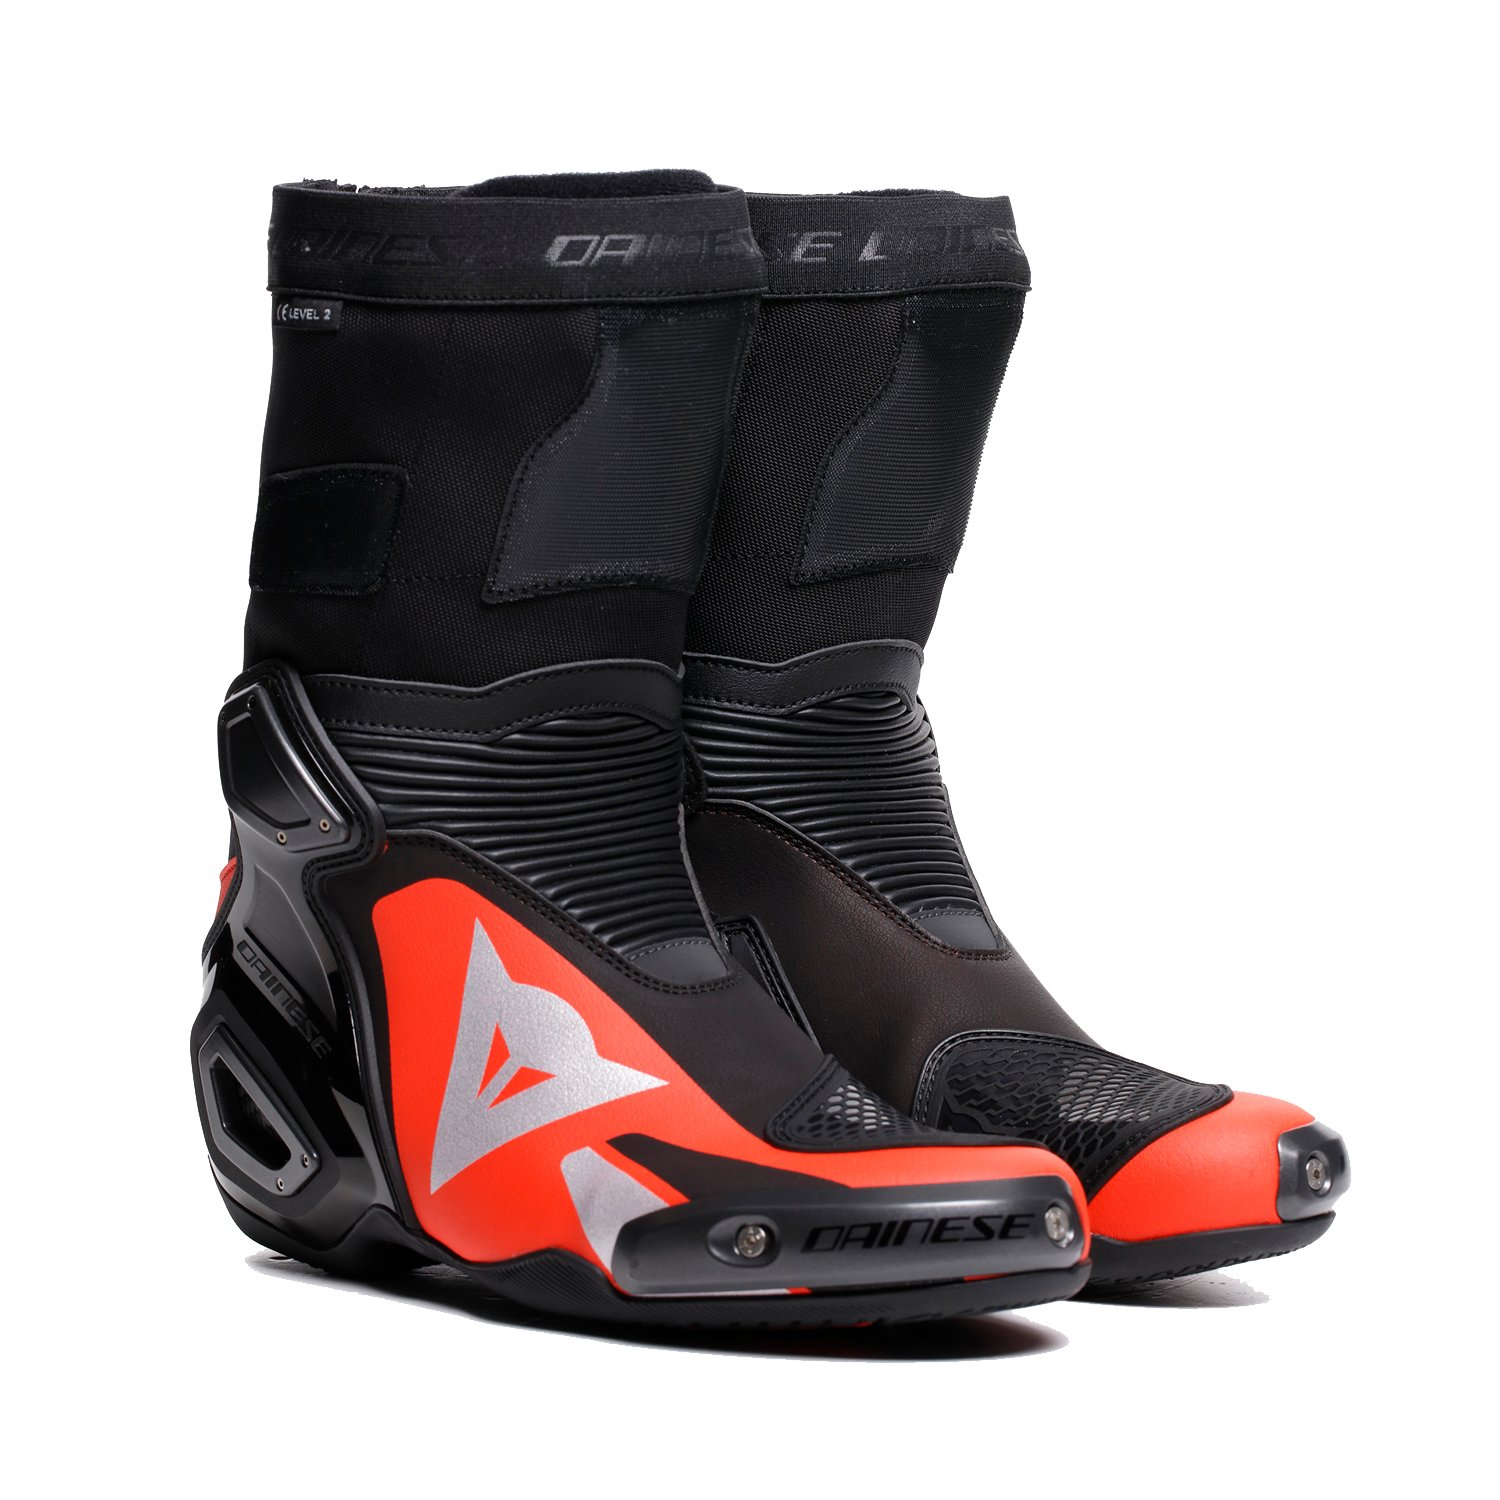 Image of Dainese Axial 2 Boots Black Red Fluo Größe 40